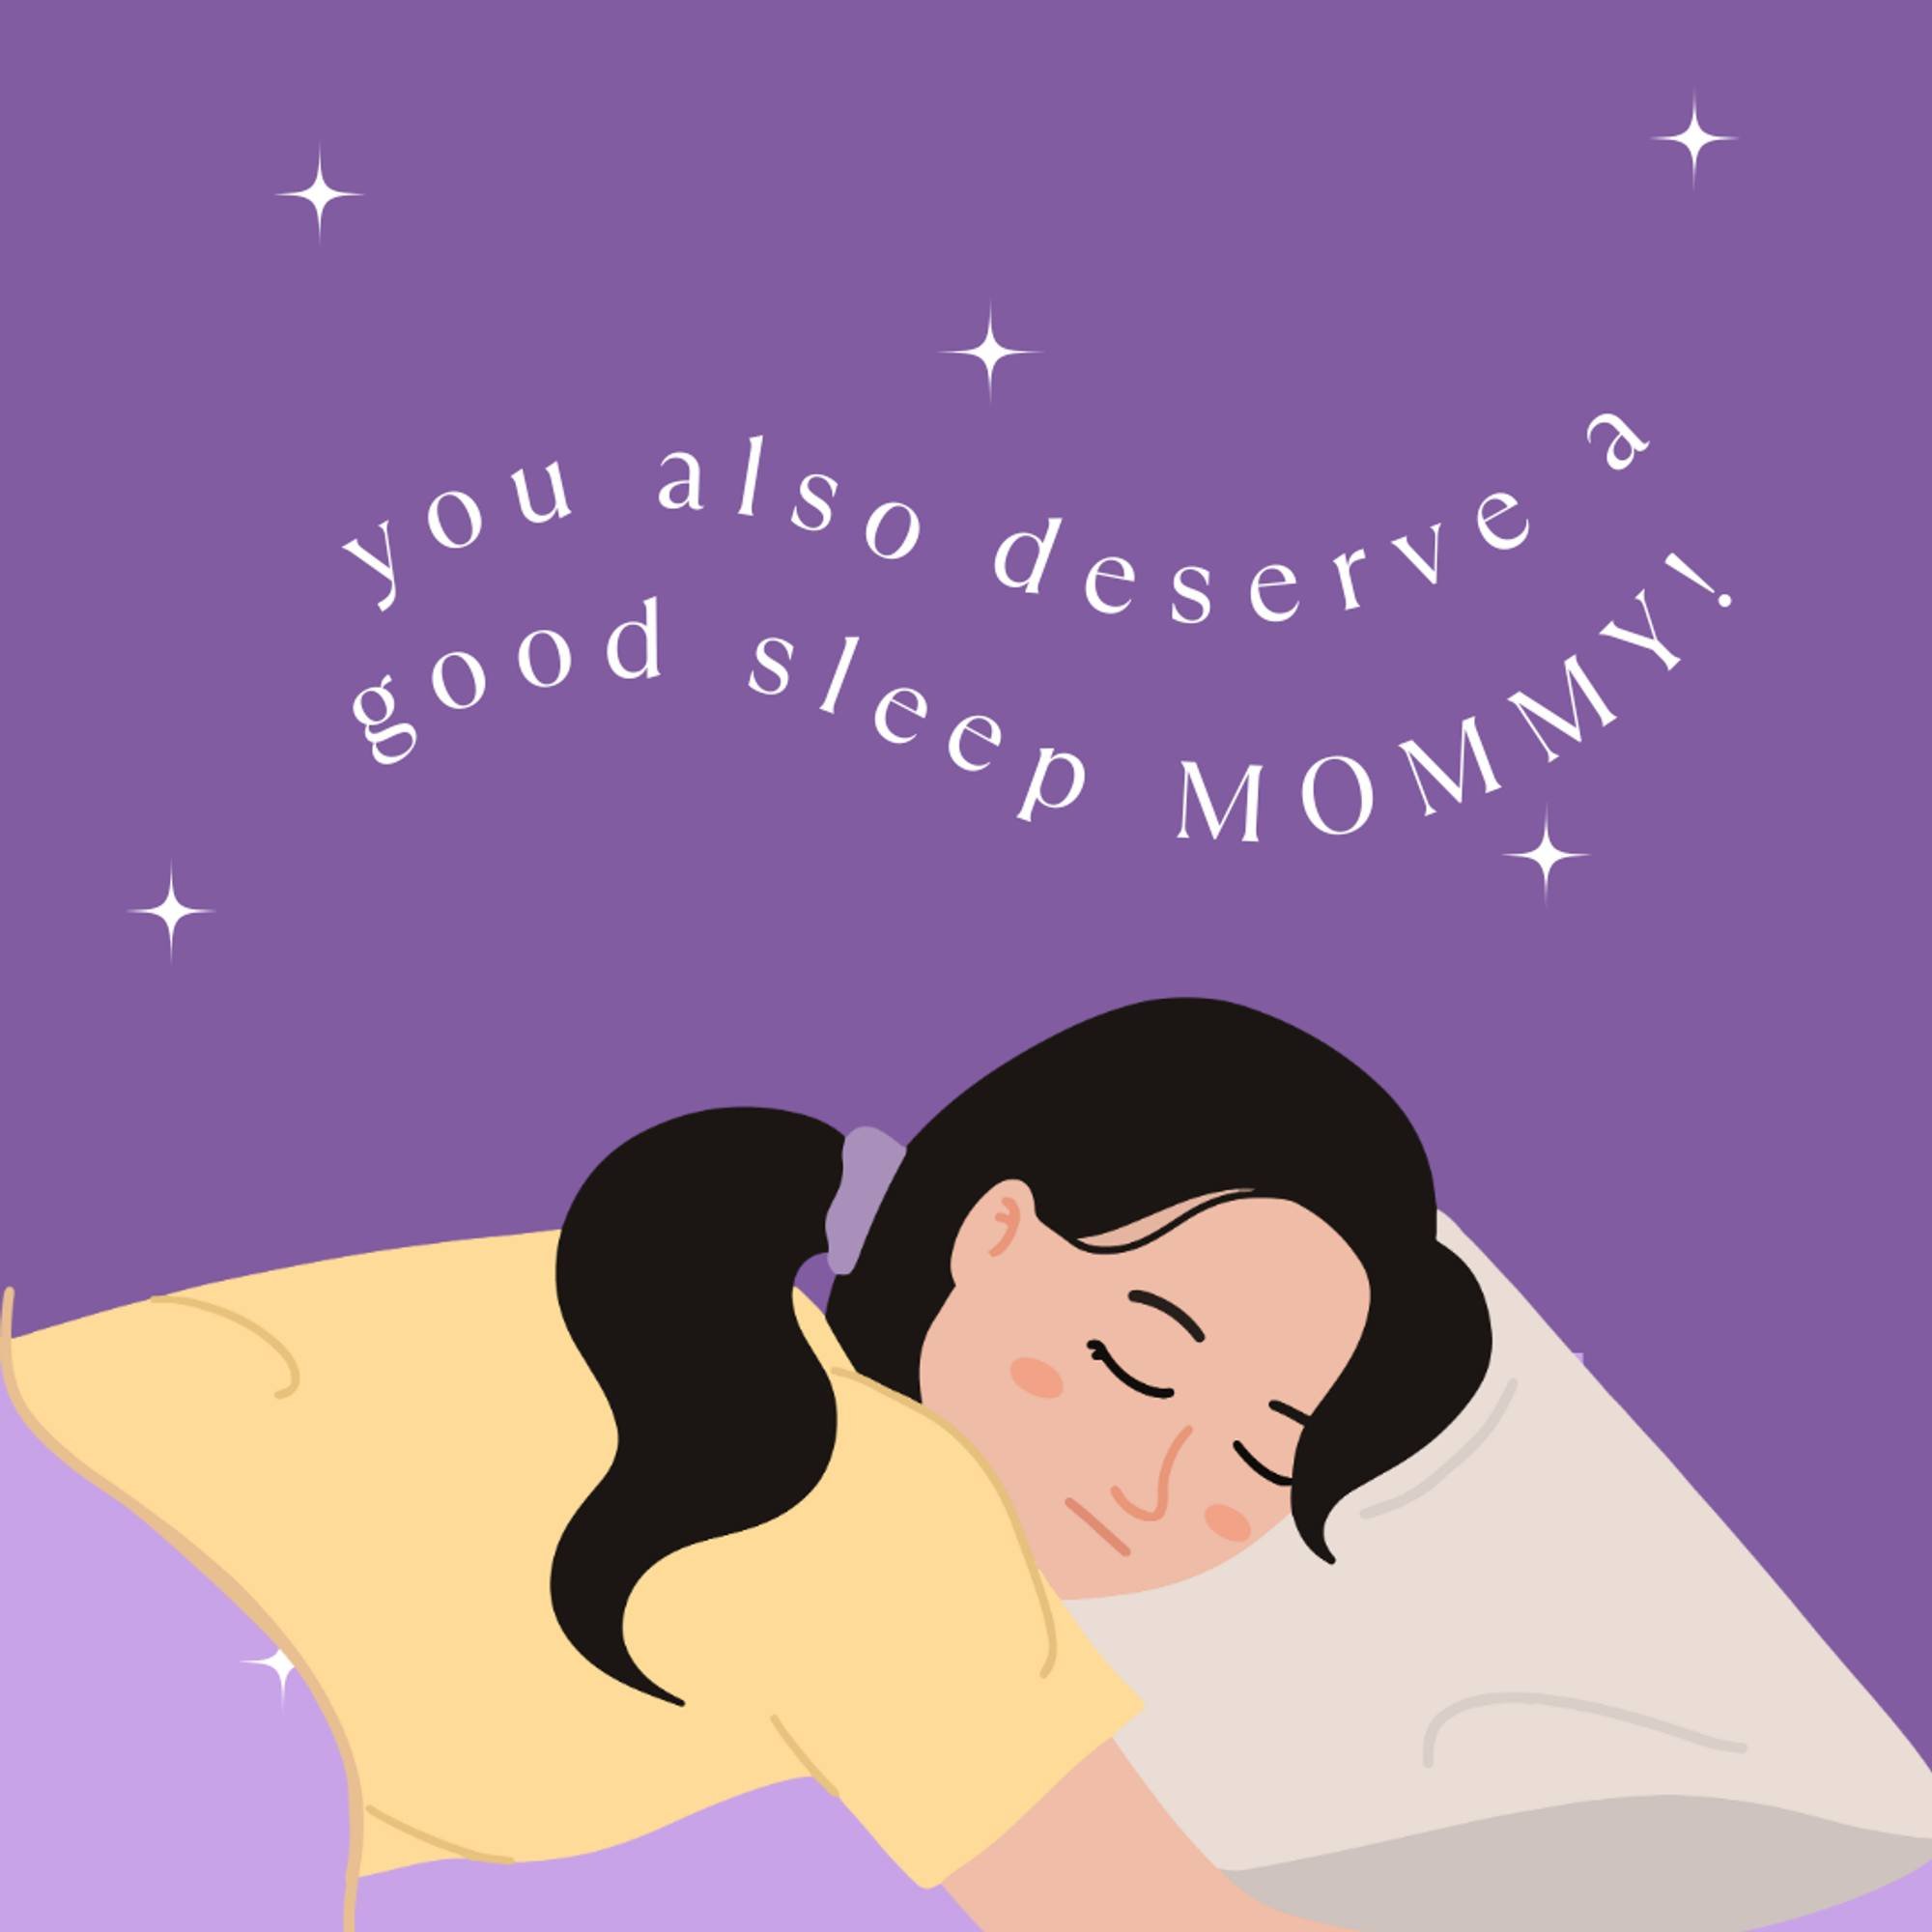 Dear Mommy, you deserve restful nights too! 💕 

Prioritizing your well-being through sleep training benefits both you and your child mentally and physically. By encouraging healthy sleep habits, you can create a peaceful haven for both you and your 